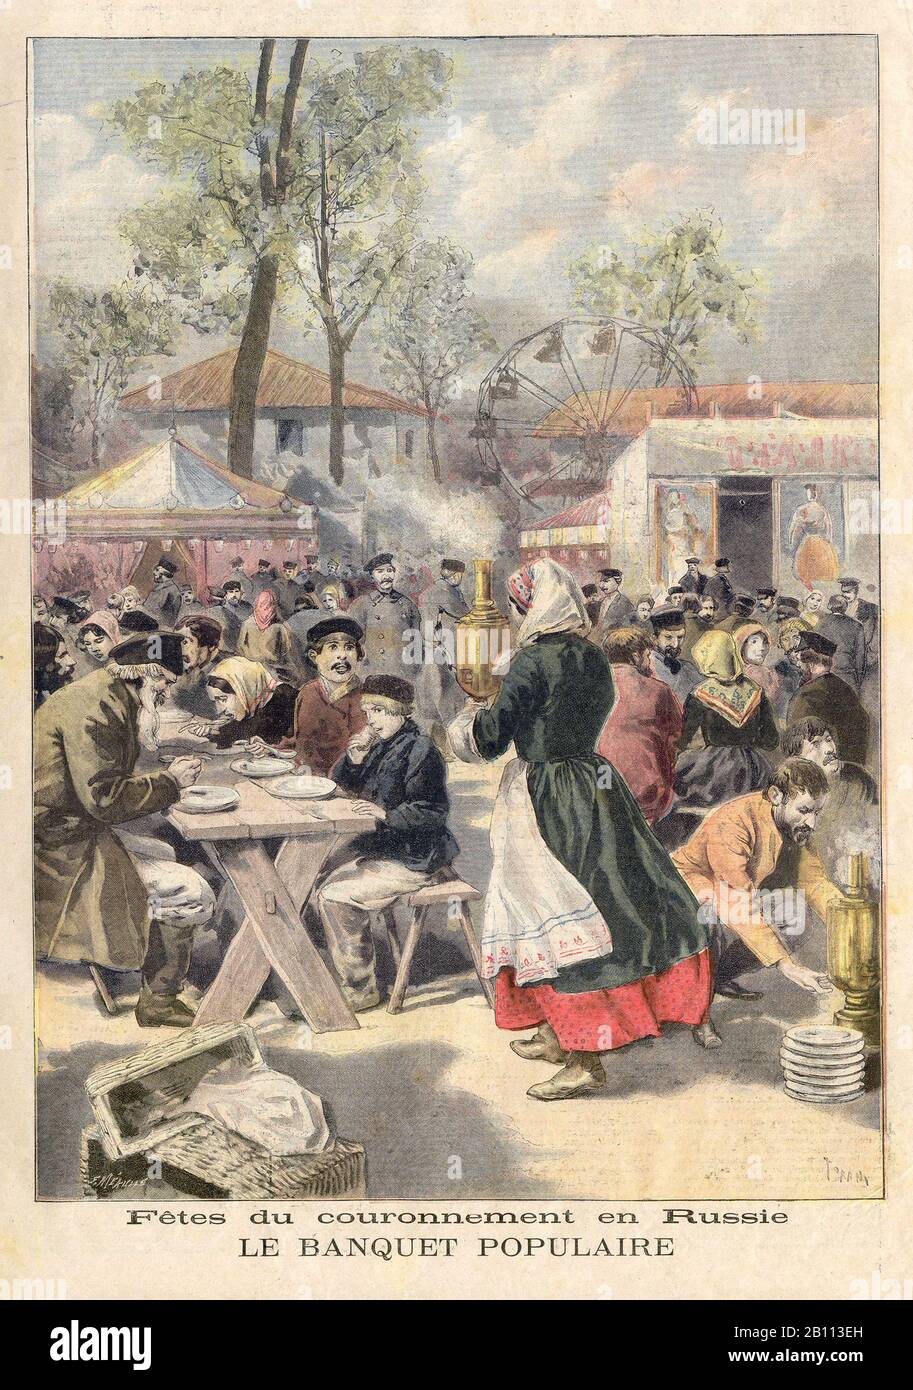 Fêtes du couronnernent Russie LE BANQUET POPULAIRE - Celebrations of the crown of Russia THE POPULAR BANQUET - In 'Le Petit Journal' French Illustrated newspaper - Stock Photo